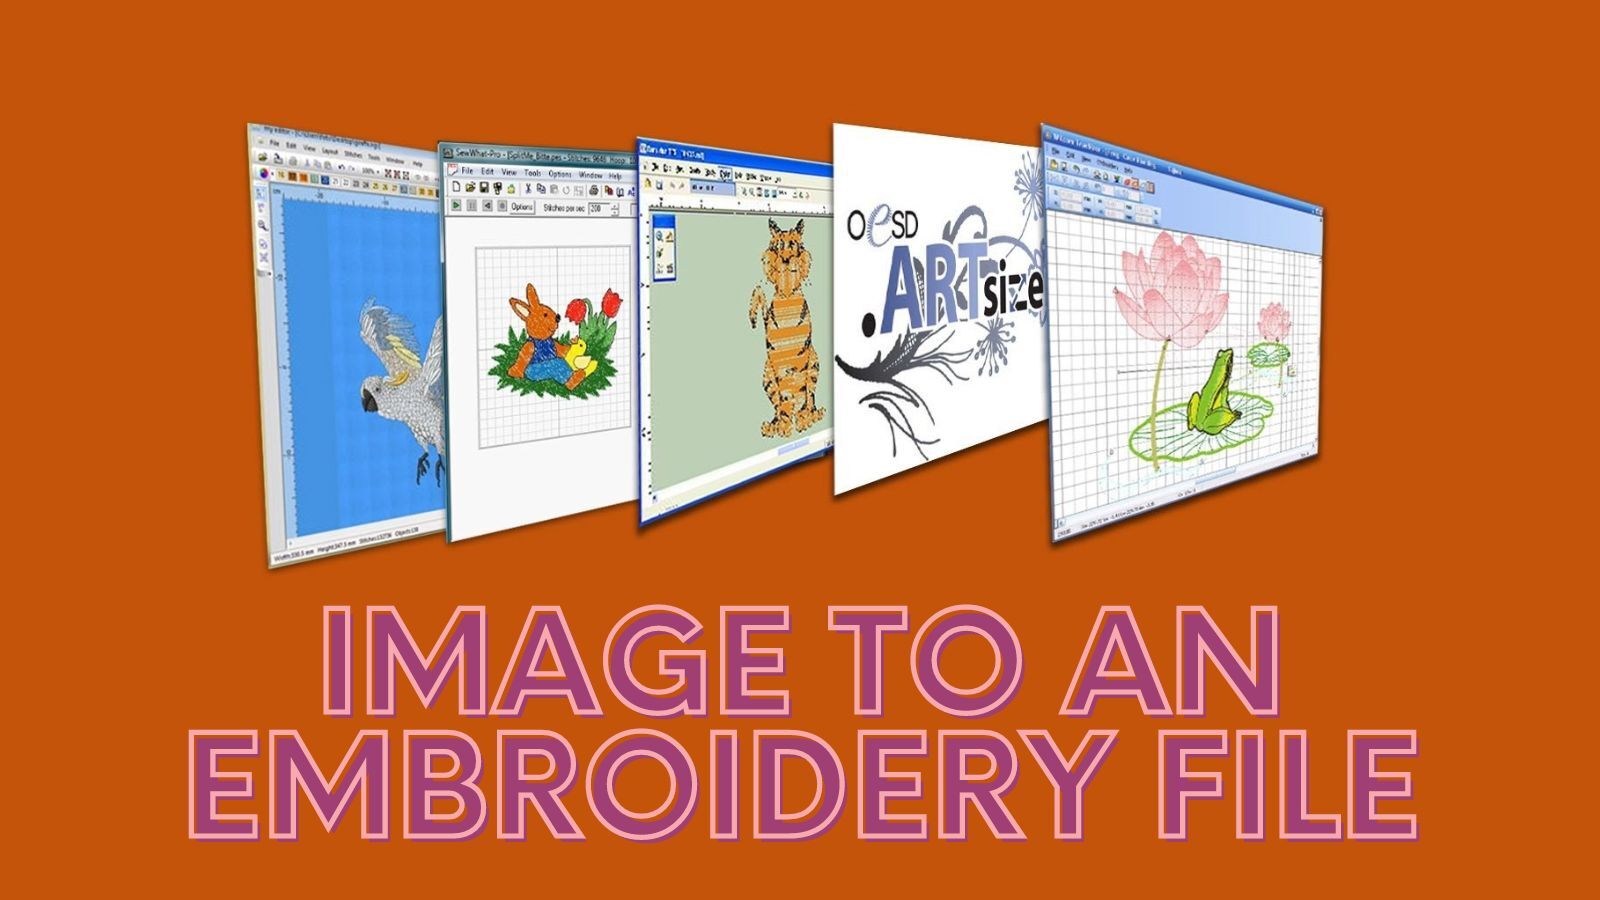 How to Convert Image to Embroidery File Free?